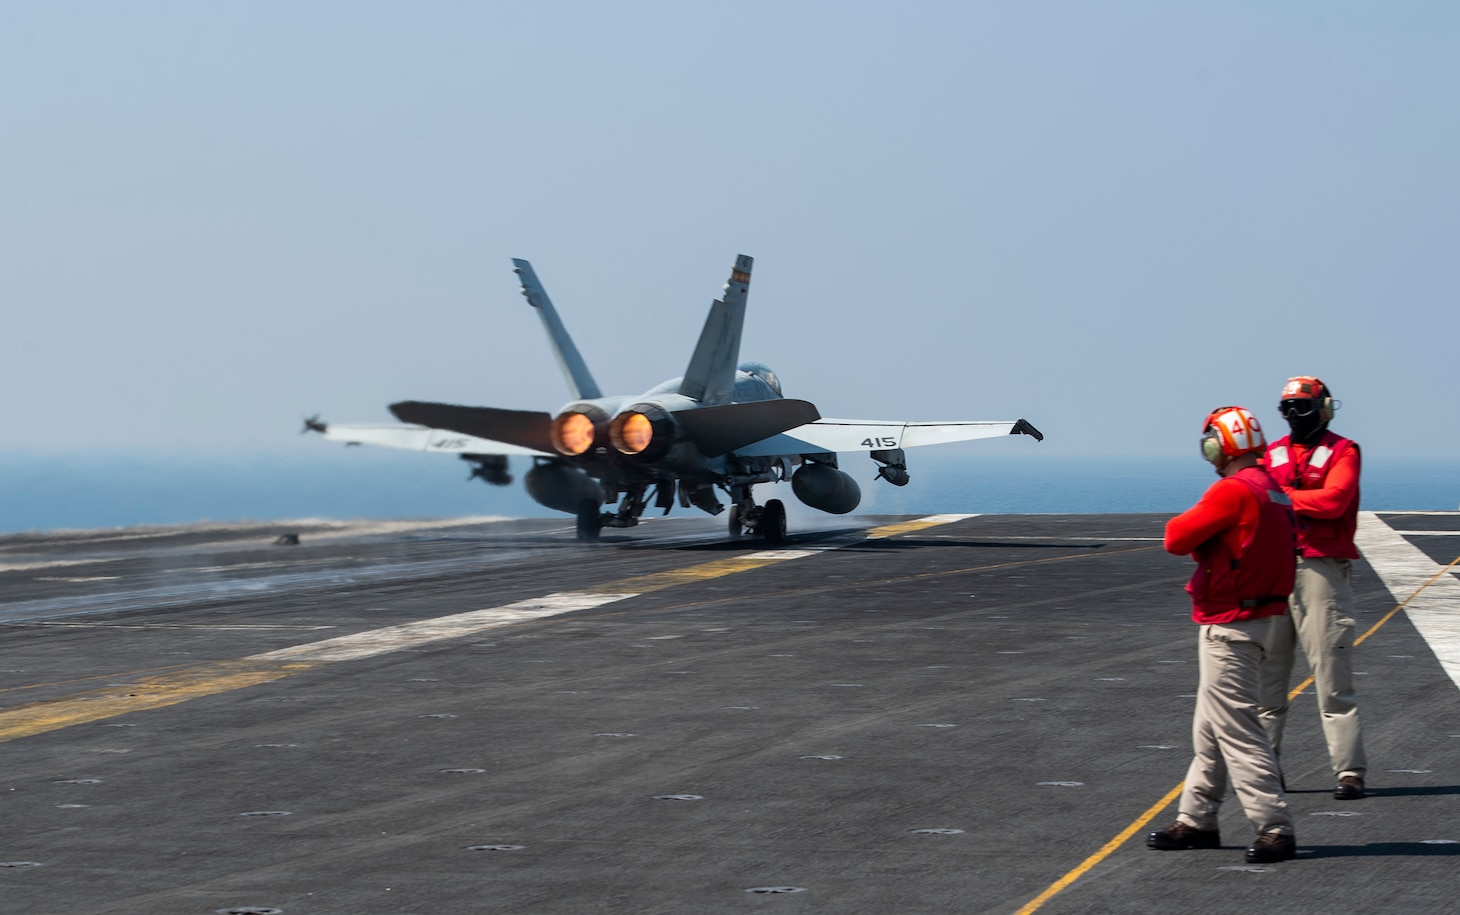 An F/A-18C Hornet, assigned to the "Death Rattlers" of Marine Fighter Attack Squadron (VMFA) 323, launches from the flight deck of the aircraft carrier USS Nimitz (CVN 68) in support of Operation Inherent Resolve.